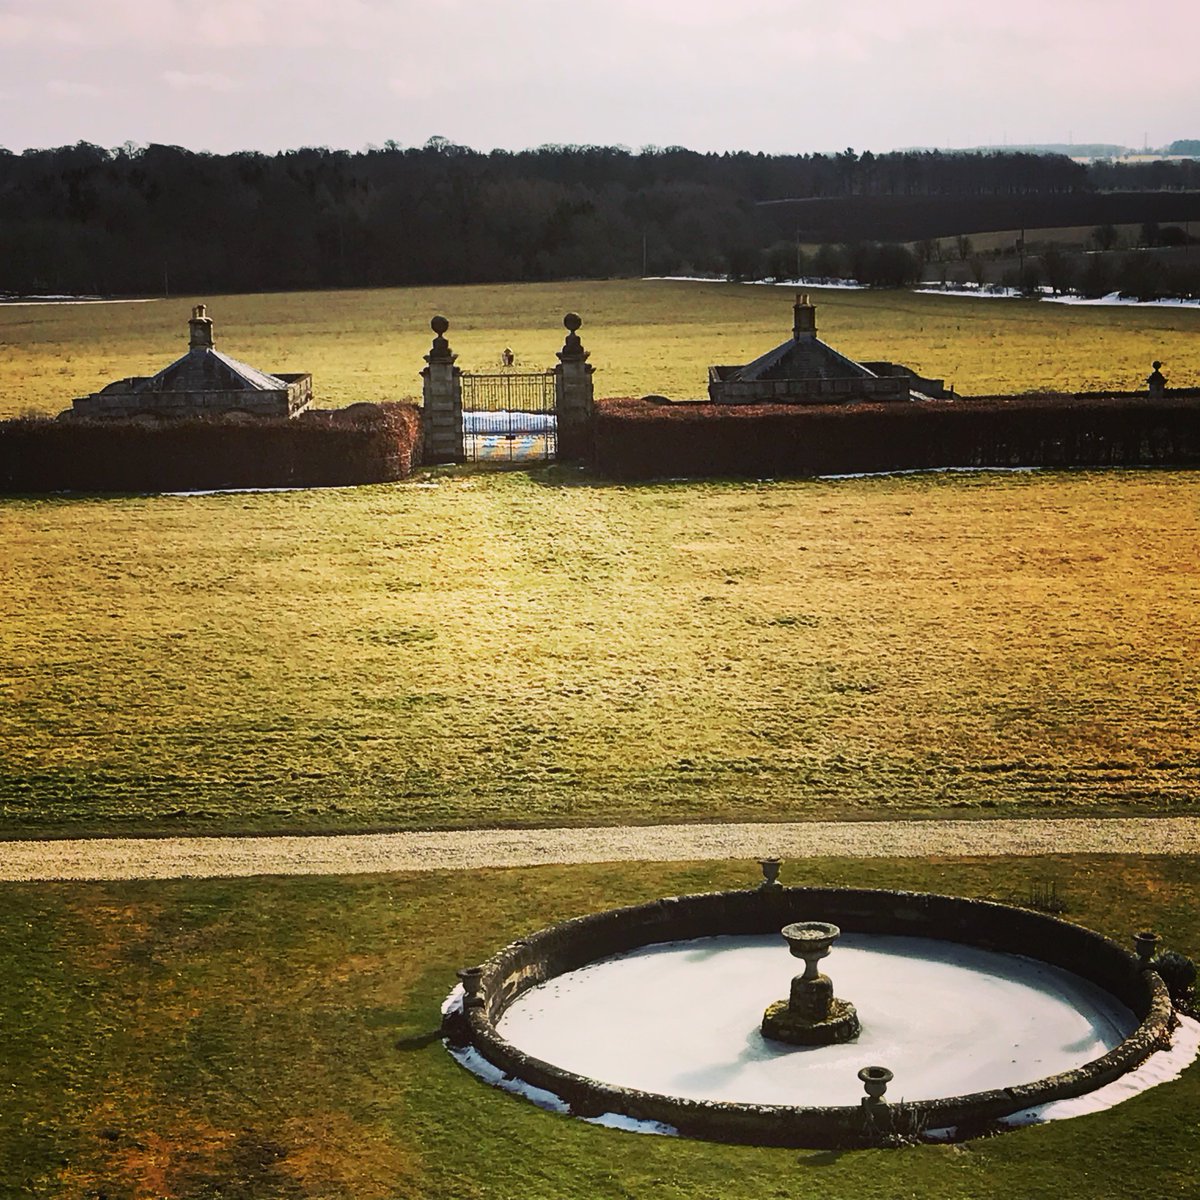 Have you ventured onto the roof at #LodgePark yet? You can see the internationally important #Bridgeman landscape in all its glory. Bridgeman was the leading landscaper of the day and was commissioned to redesign the Deer Park in the 1720s.
@NTLodgePark